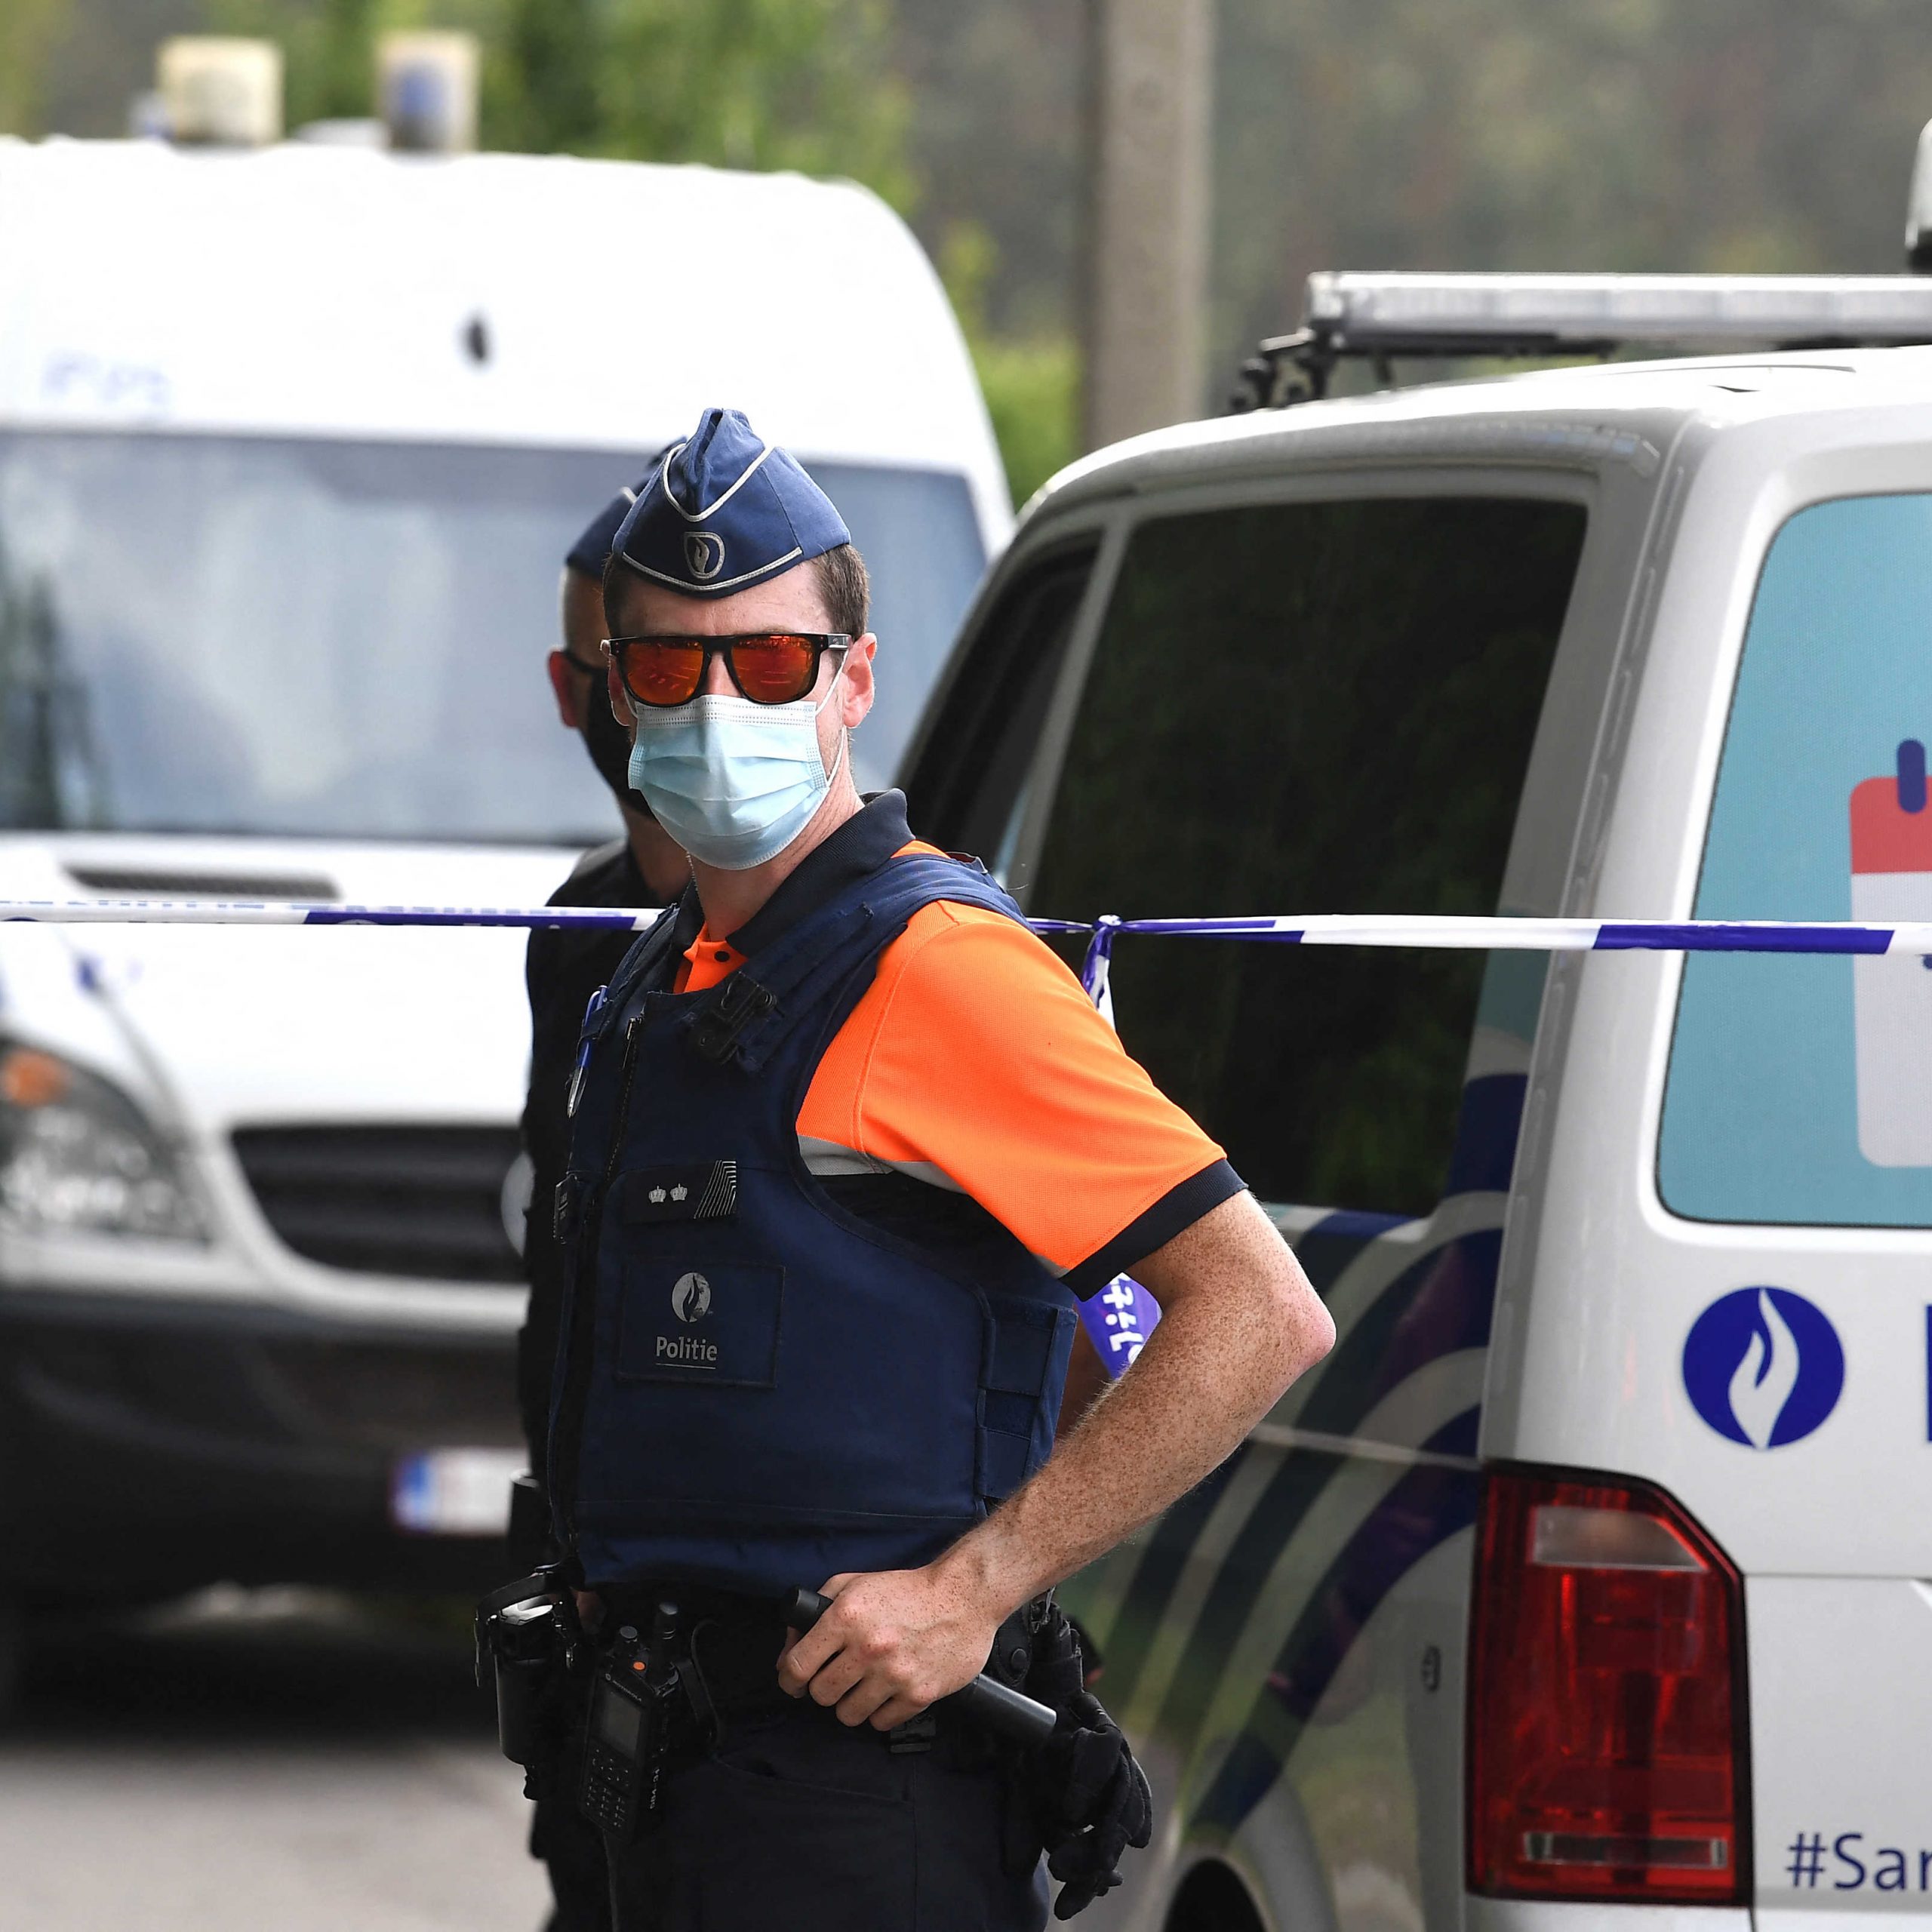 Belgium police cordon off the area after a body found in the Dilserbos, a forest area of Hoge Kempen National Park near Dilsen-Stokkem, was confirmed as that of missing rogue soldier Jurgen Conings, on June 20, 2021. - Jurgen Conings, the far-right Belgian soldier who sparked a manhunt last month when he went missing after stealing arms from a military base, "has been found dead", the country's defence minister and chief of staff said in a statement on June 20, 2021. Prosecutors had earlier said that a body found in eastern Belgium of a man who appeared to have killed himself with a gun was likely Conings "according to the first elements of the investigation". (Photo by JOHN THYS / AFP)